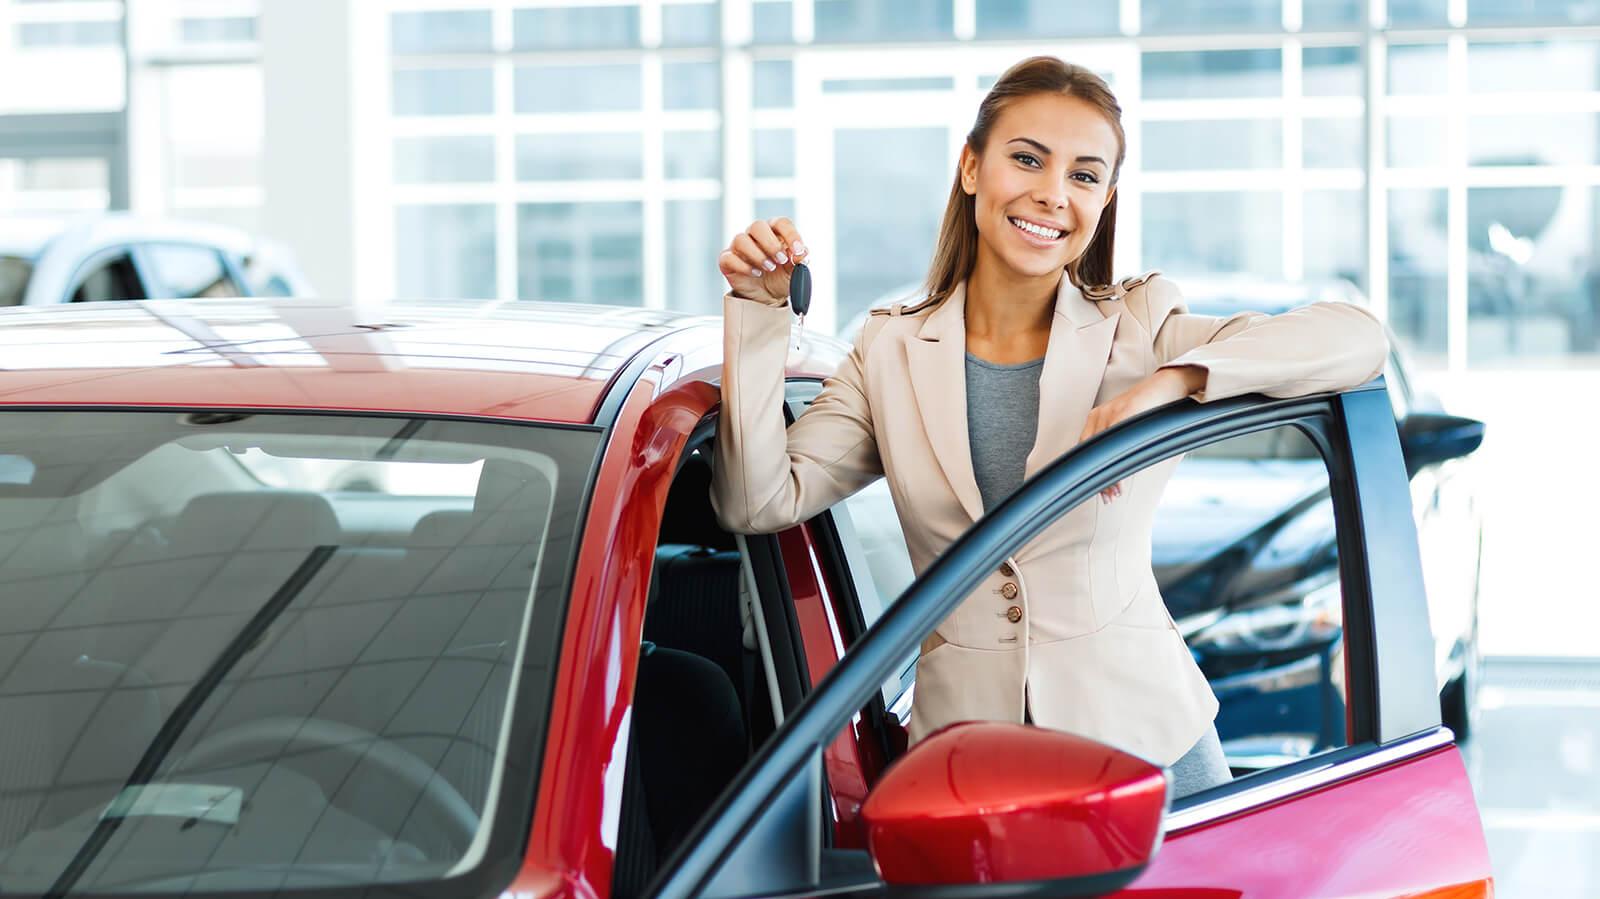 Smiling woman holding keys by a new car